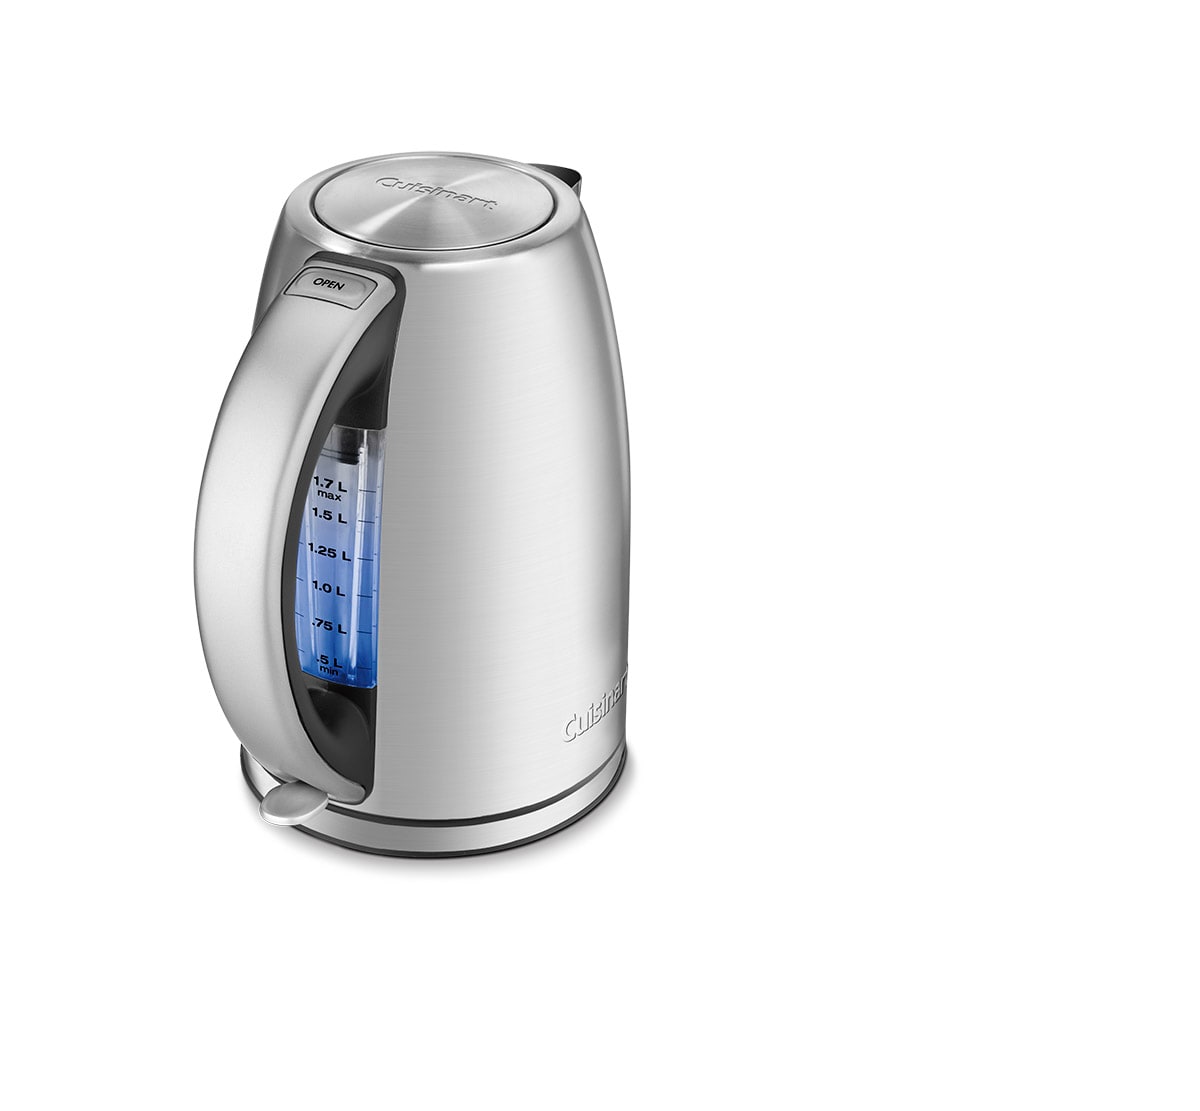 STAY by Cuisinart Cordless Electric Kettle - Stainless